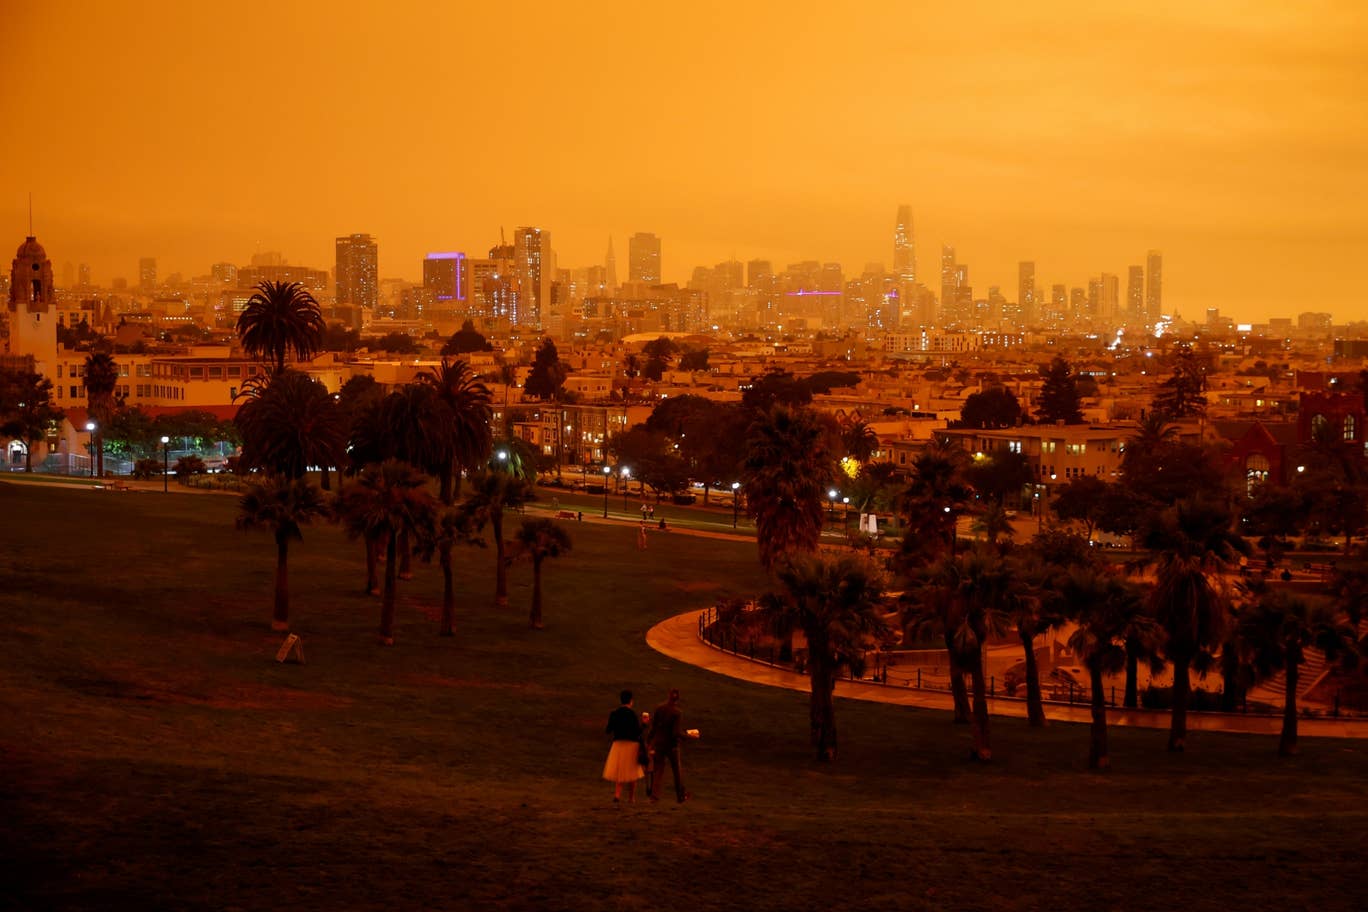 People relax under an orange smoke-filled sky at Dolores Park in San Francisco, California on September 9, 2020. Photo: AFP